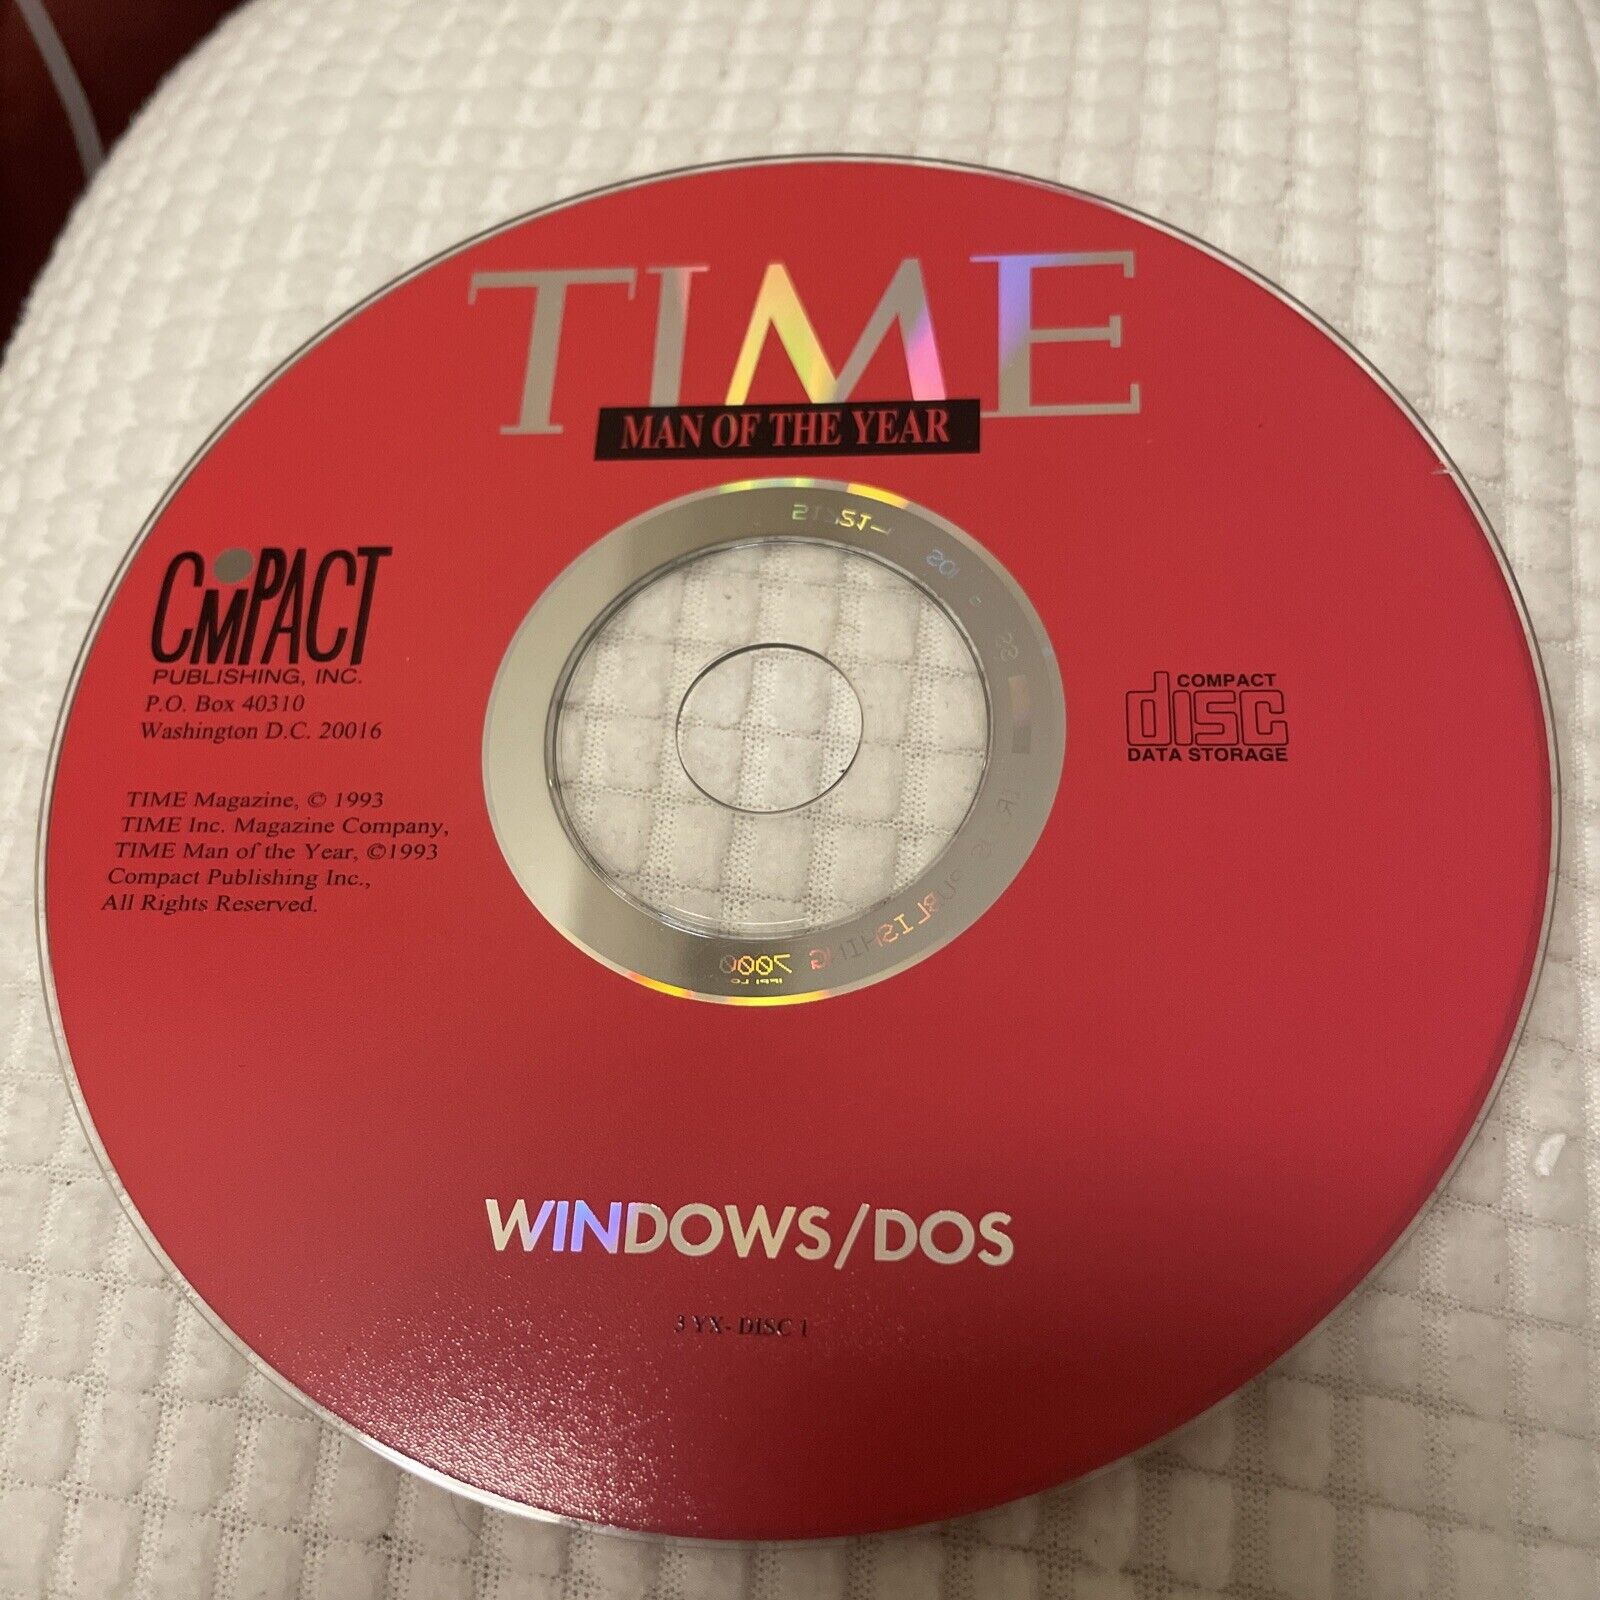 VINTAGE TIME MAGAZINE MAN OF THE YEAR CD-ROM WINDOWS DOS 1993 RARE